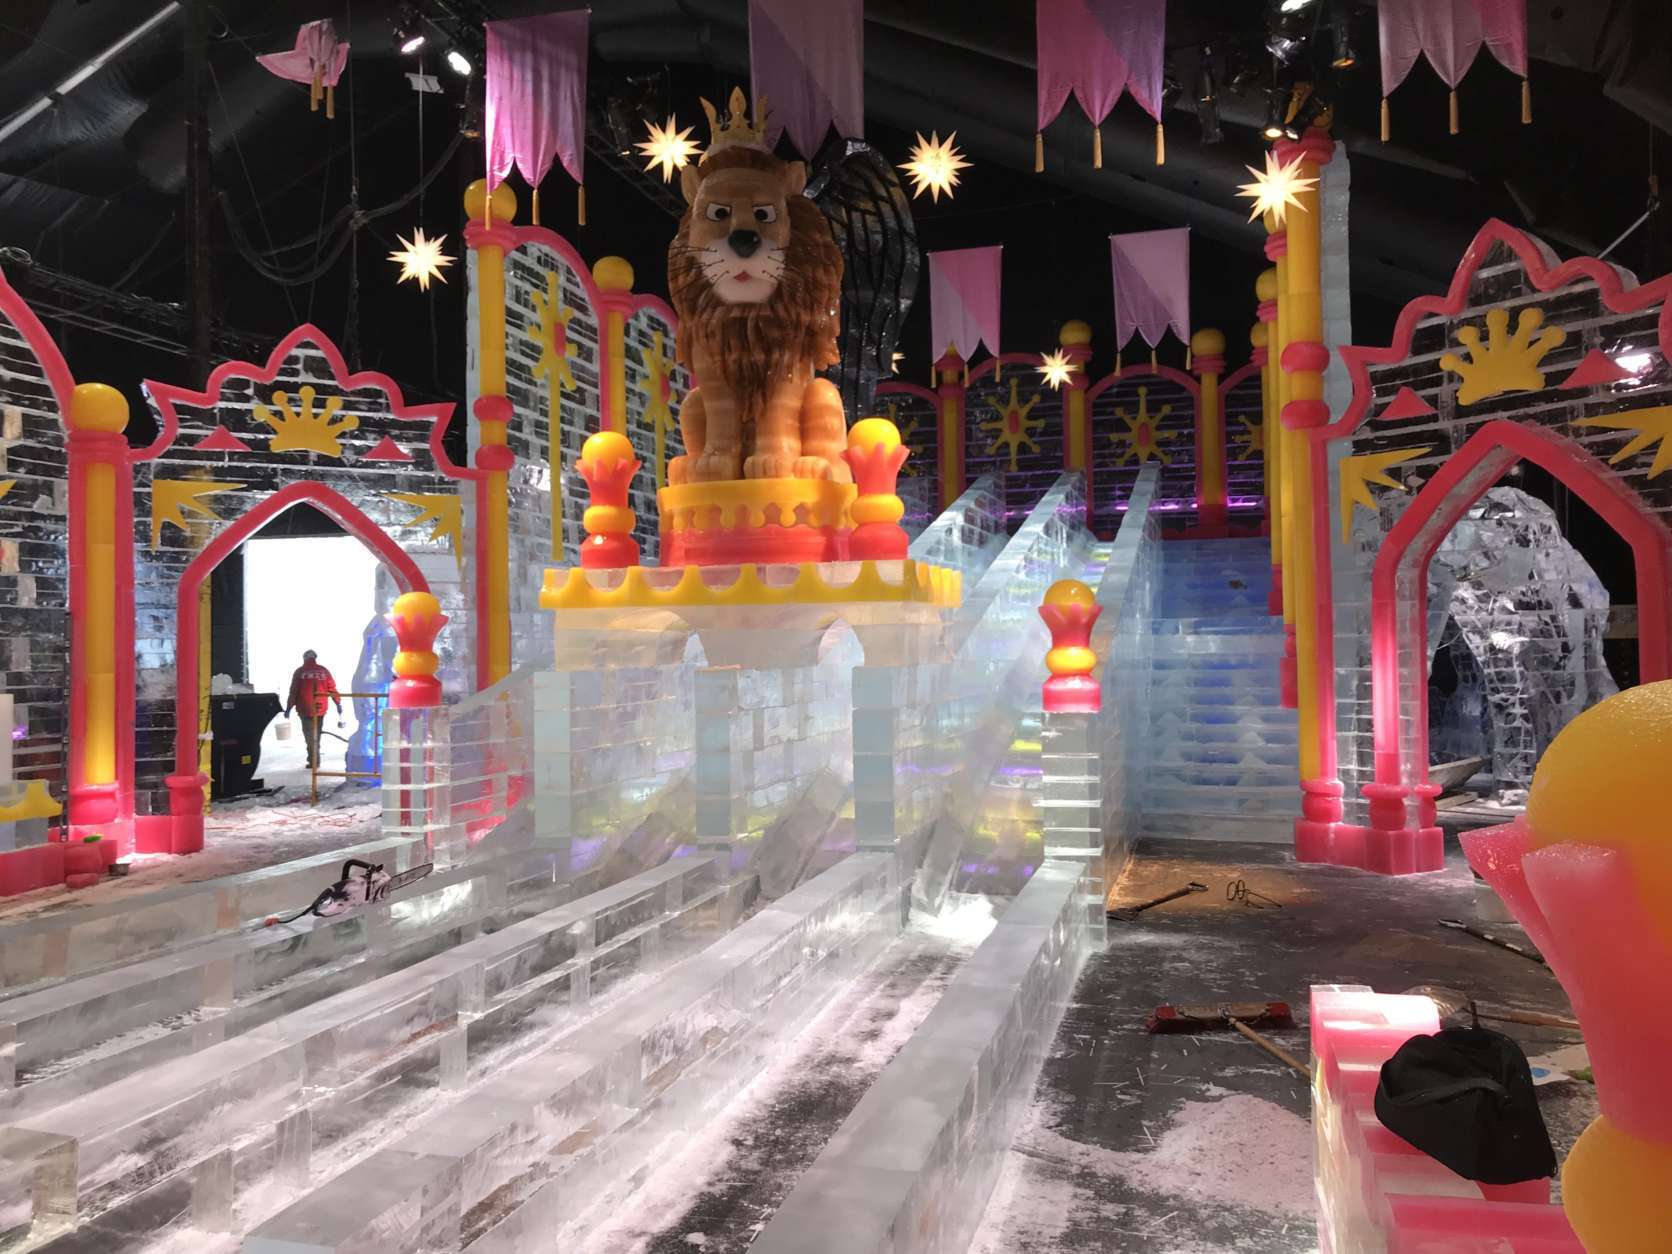 The attraction’s ice slides are always popular, and this year, entering the slide room is like visiting The Island of Misfit Toys, complete with King Moonracer, the winged lion.  (WTOP/Michelle Basch)